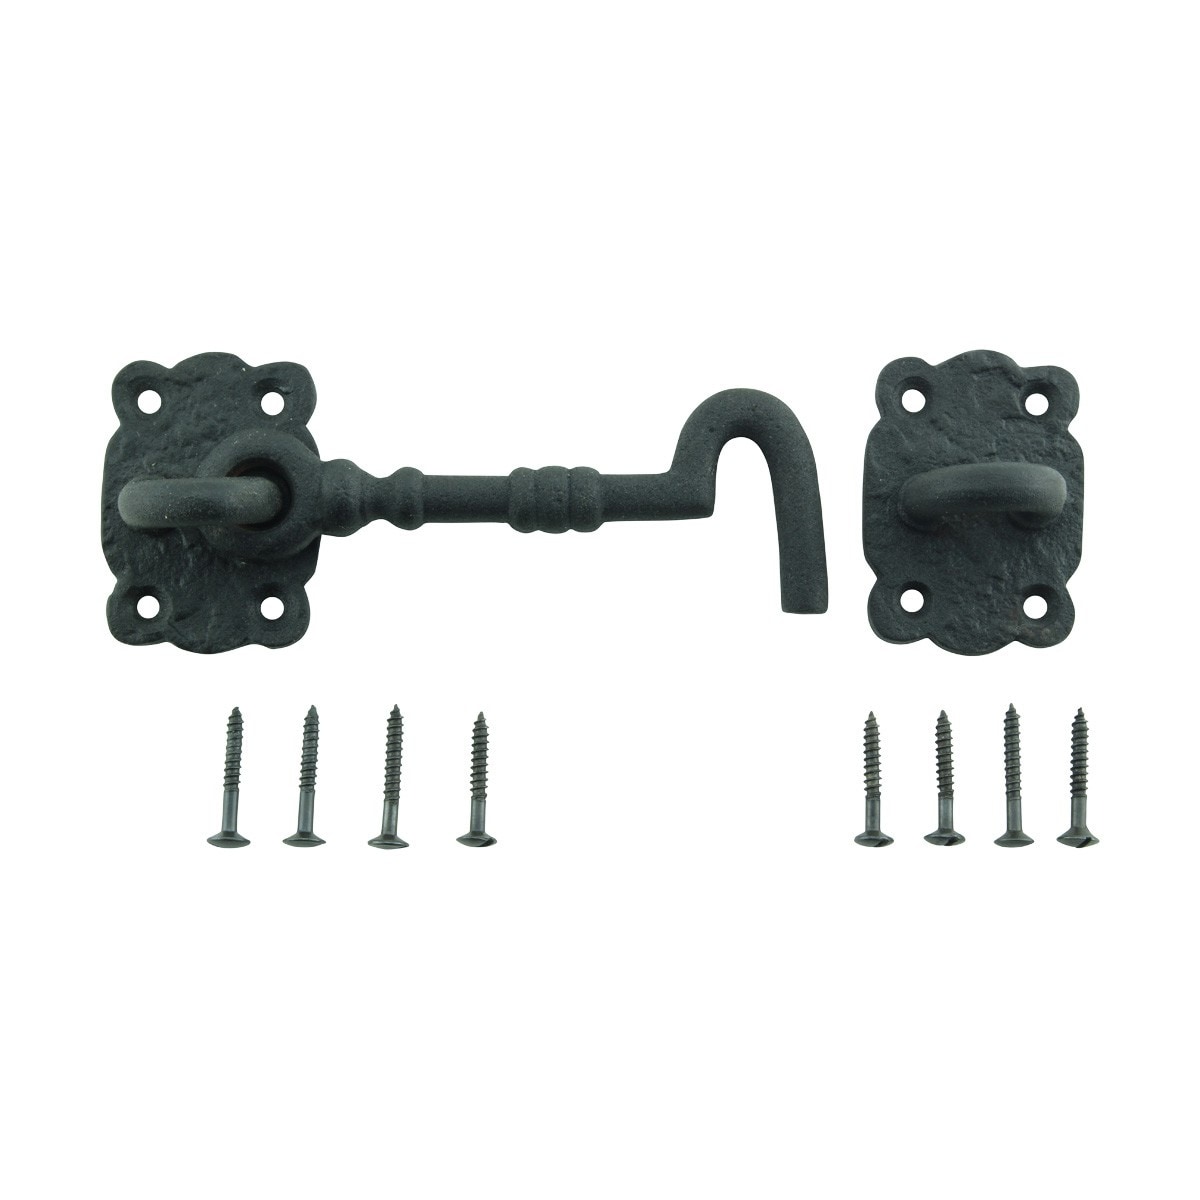 Door Latch Lock 5.5 Black Wrought Iron Hook and Eye Latch for